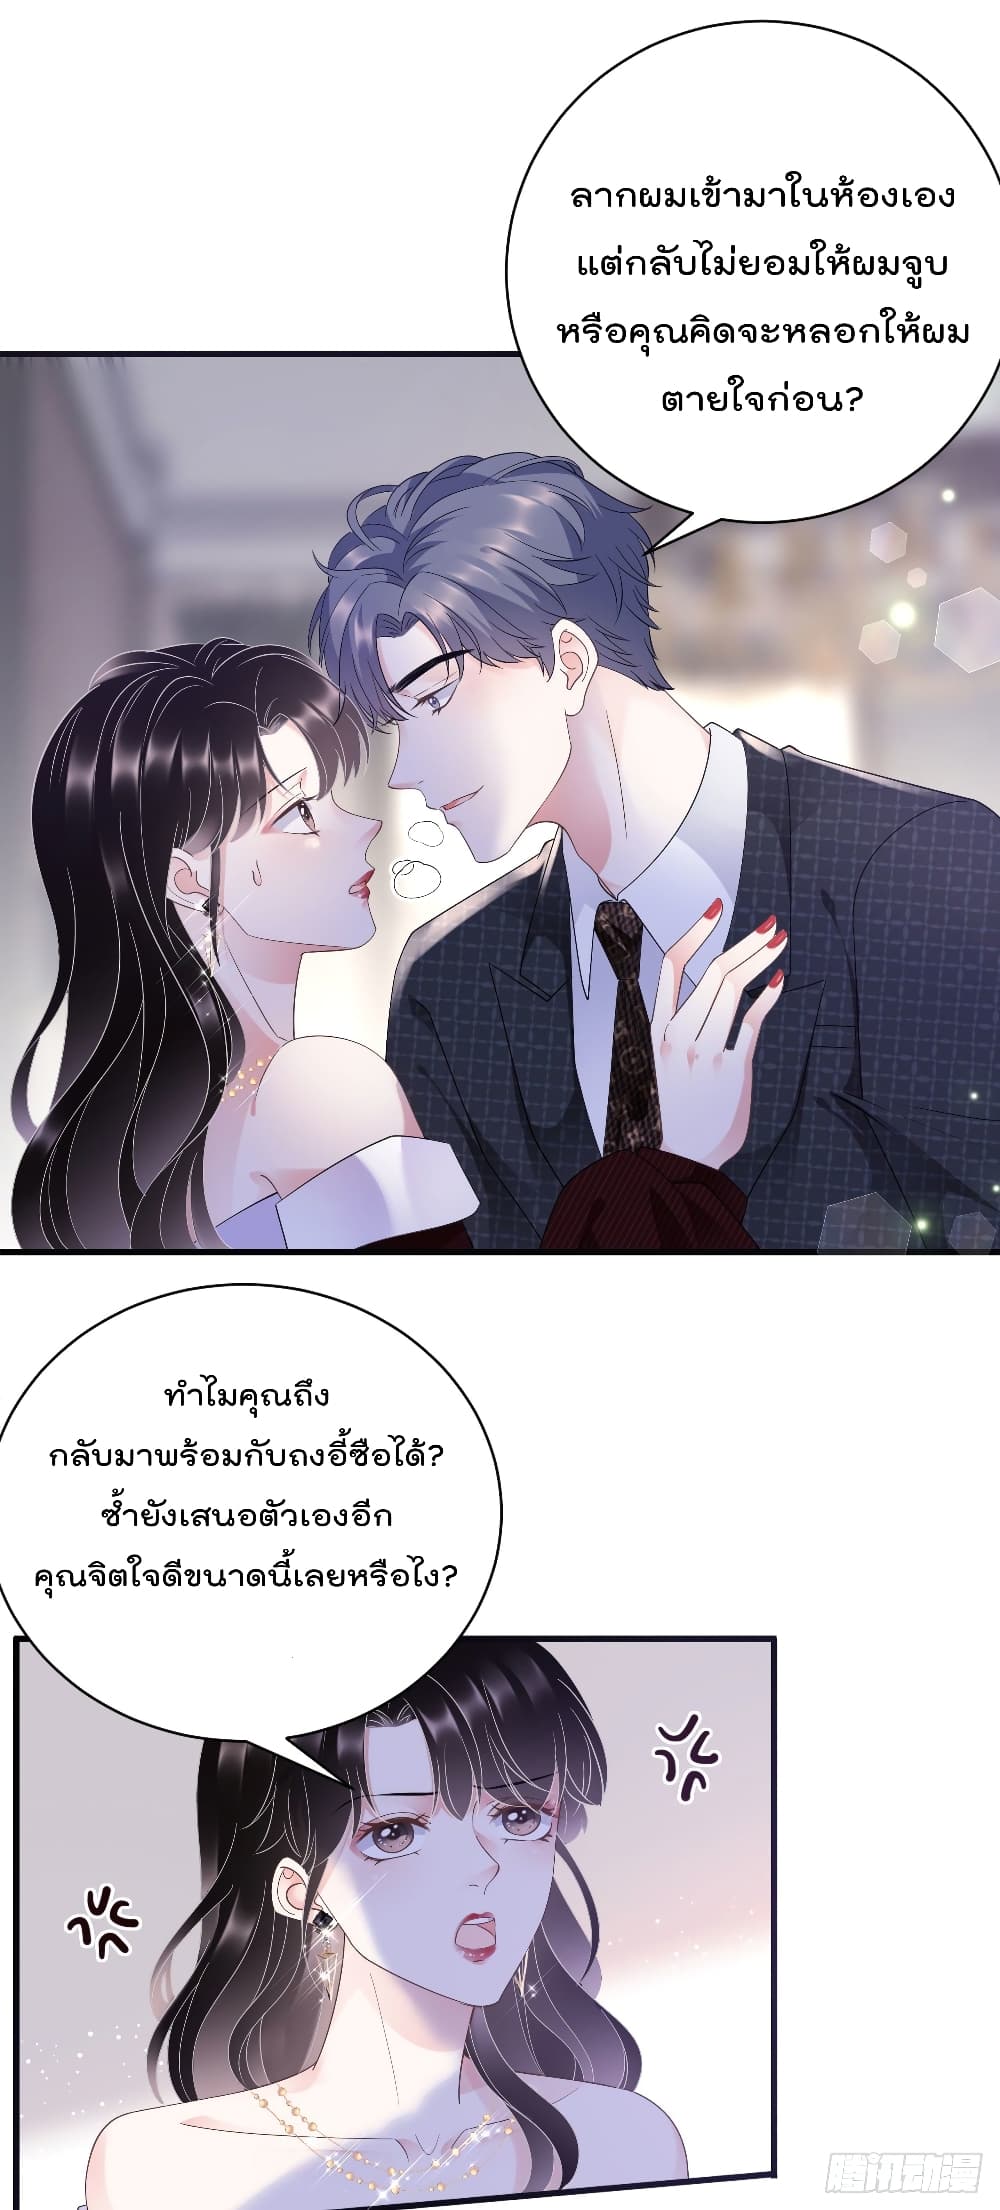 What Can the Eldest Lady Have คุณหนูใหญ่ ทำไมคุณร้ายอย่างนี้ 18-18